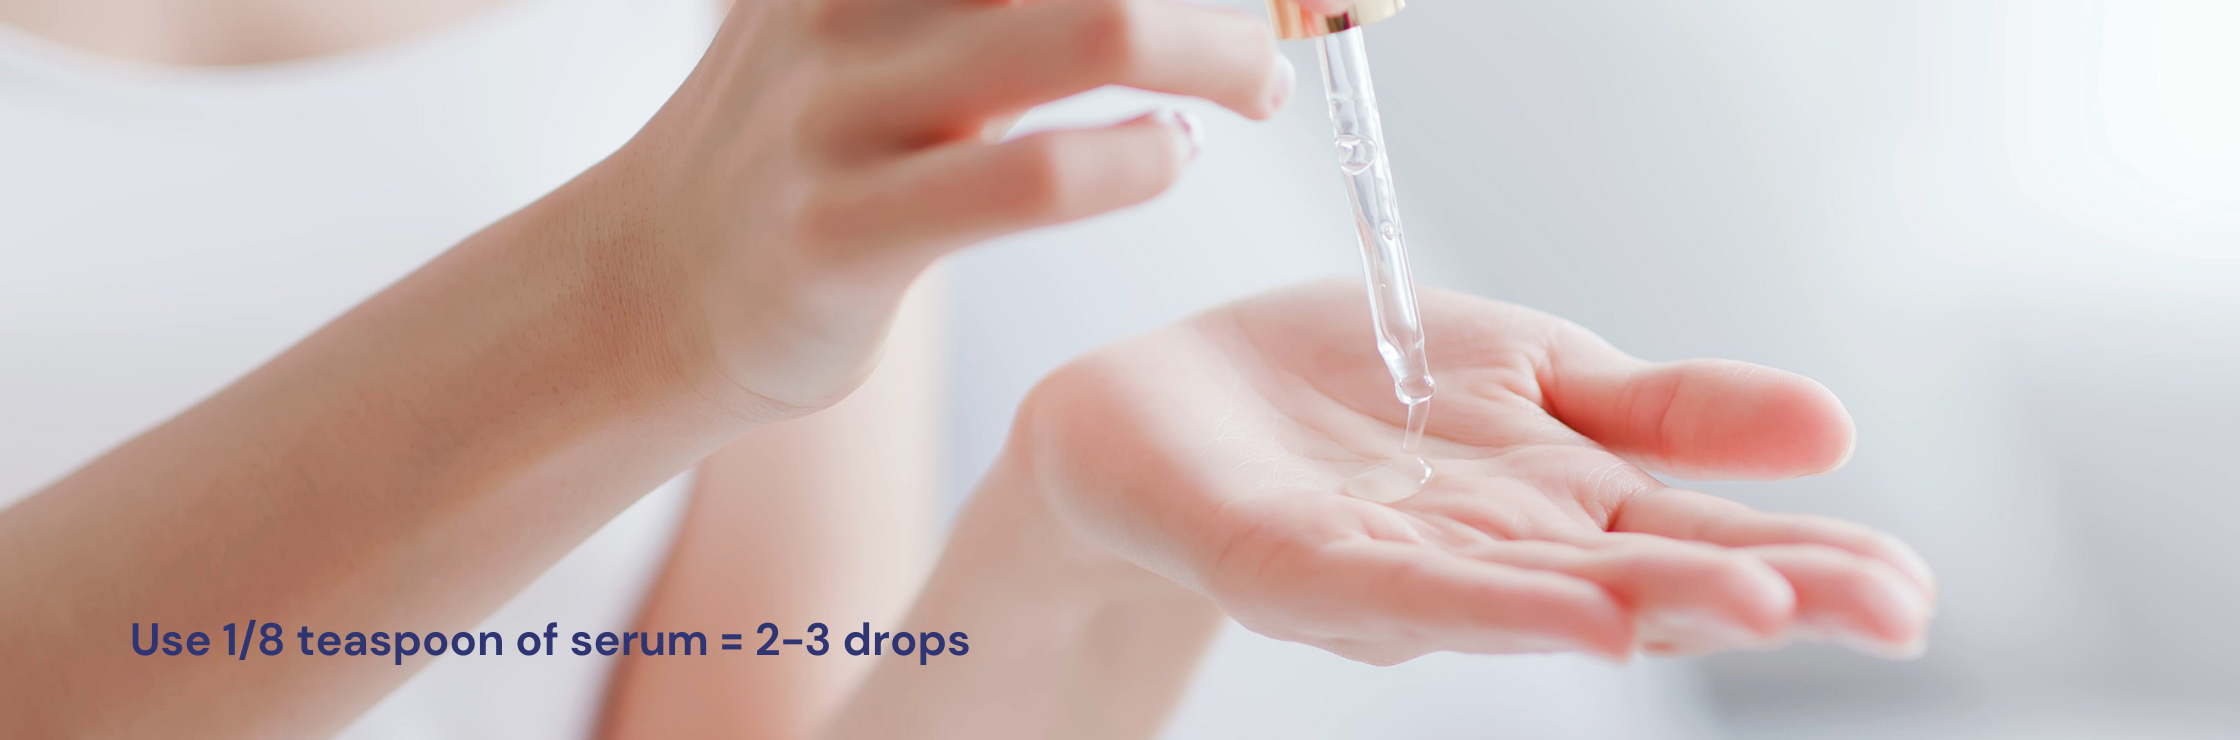 use only 2-3 drops of serum